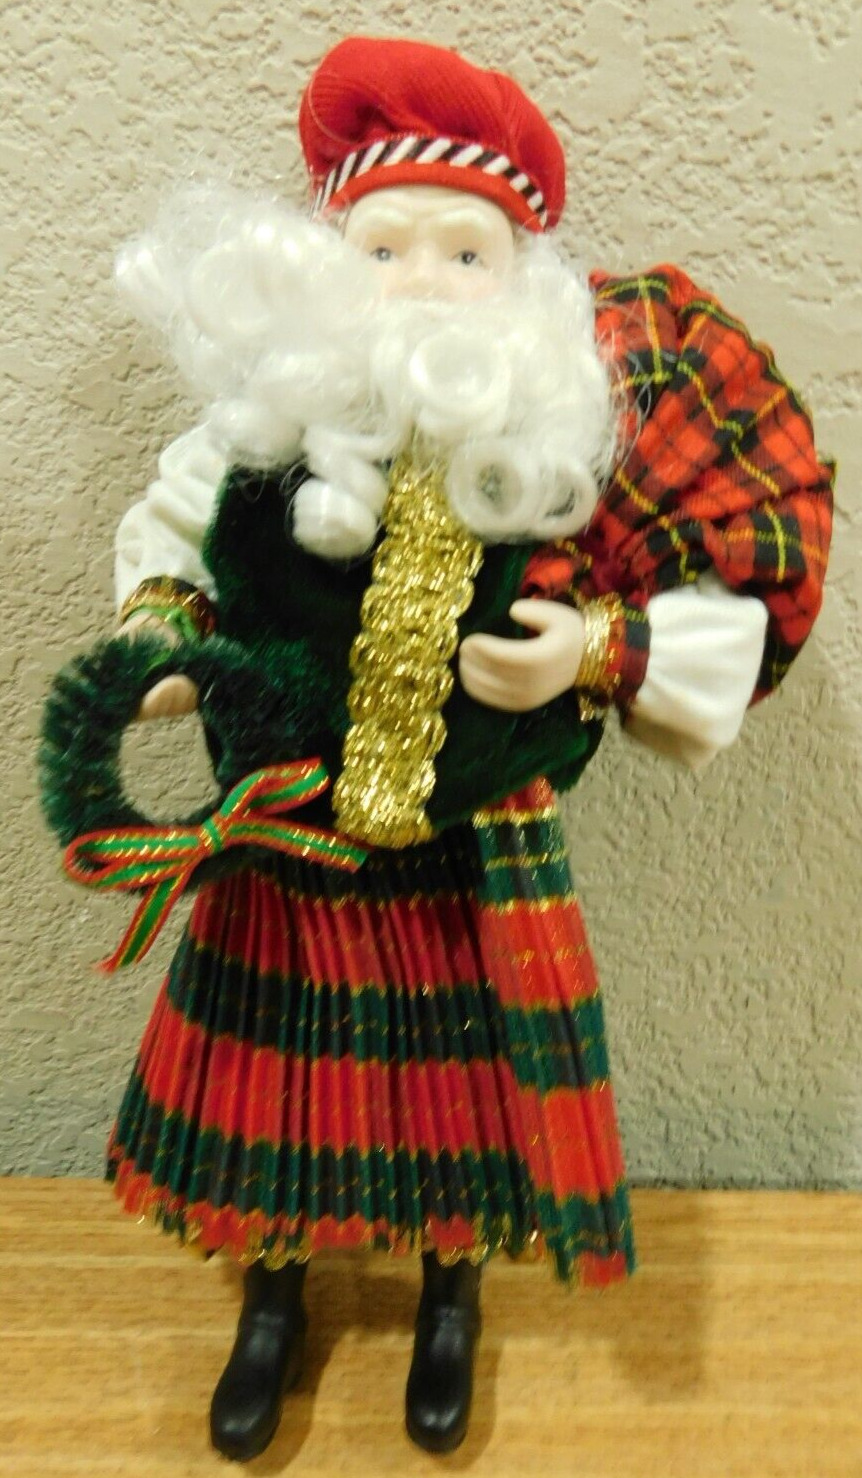 Santa Clause With Bag Of Toys In Kilt Christmas Figure With Wreath Rare